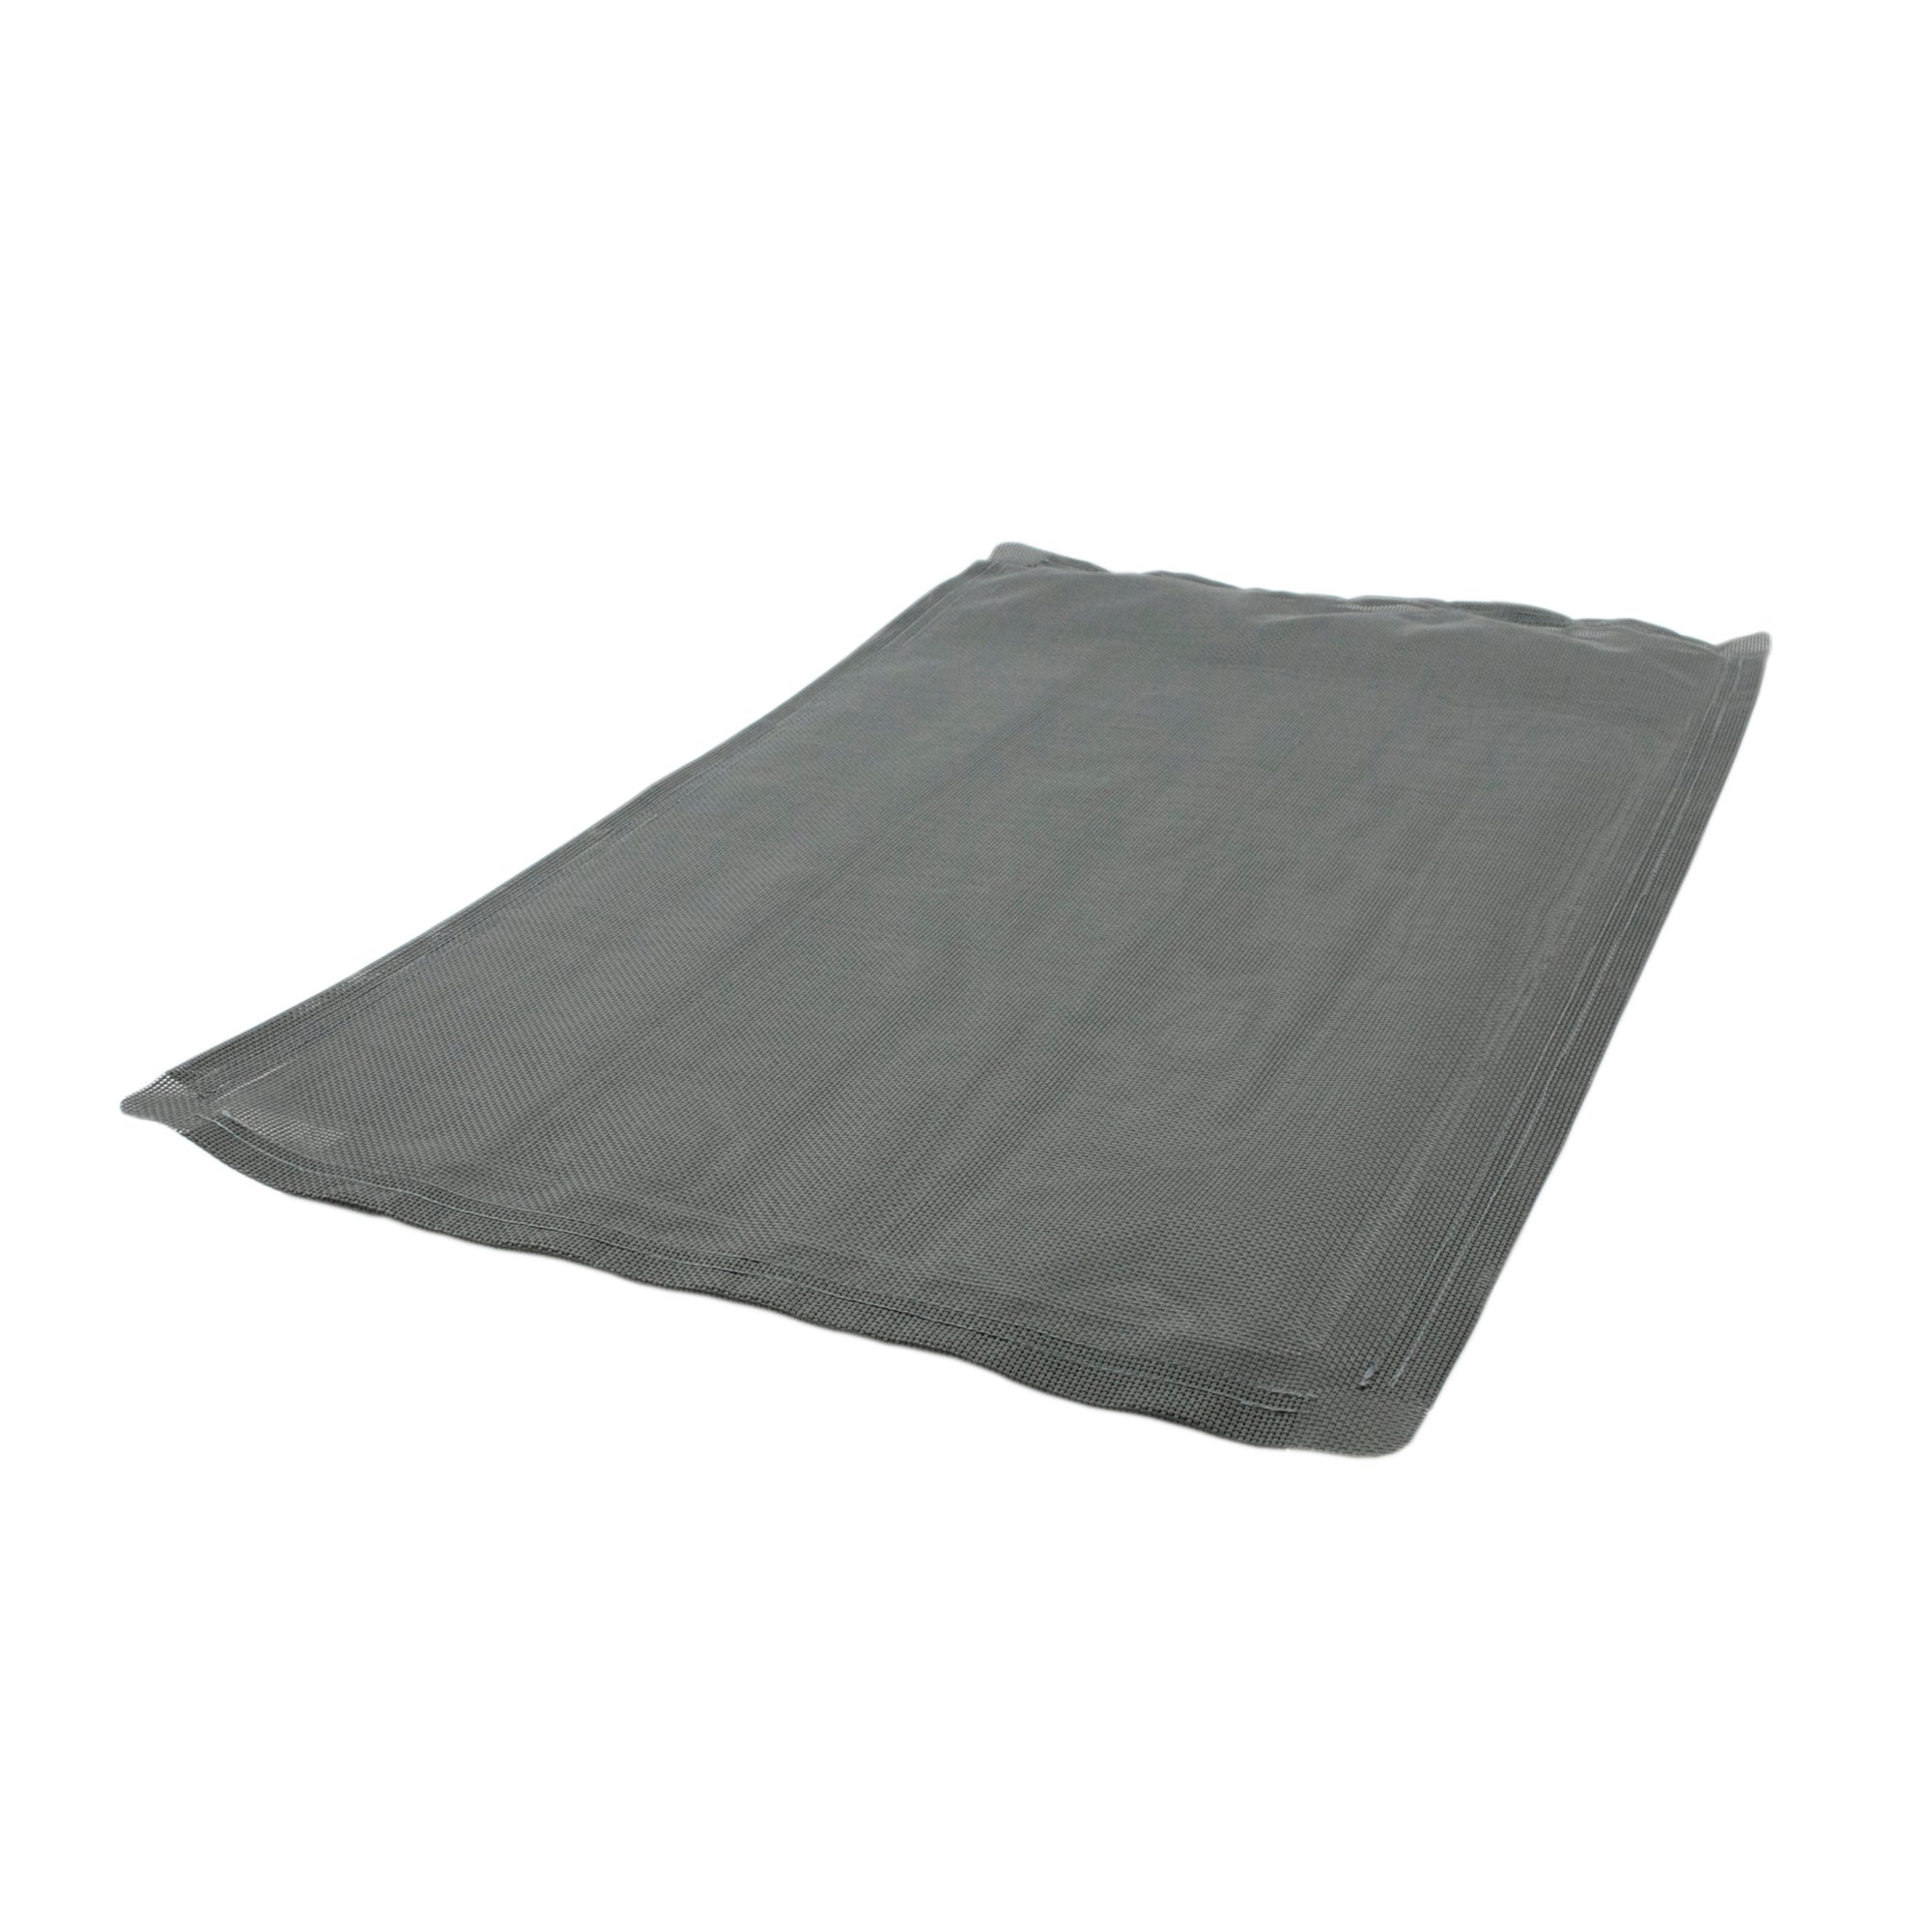 K9 COT Elevated Dog Bed: Mesh Top